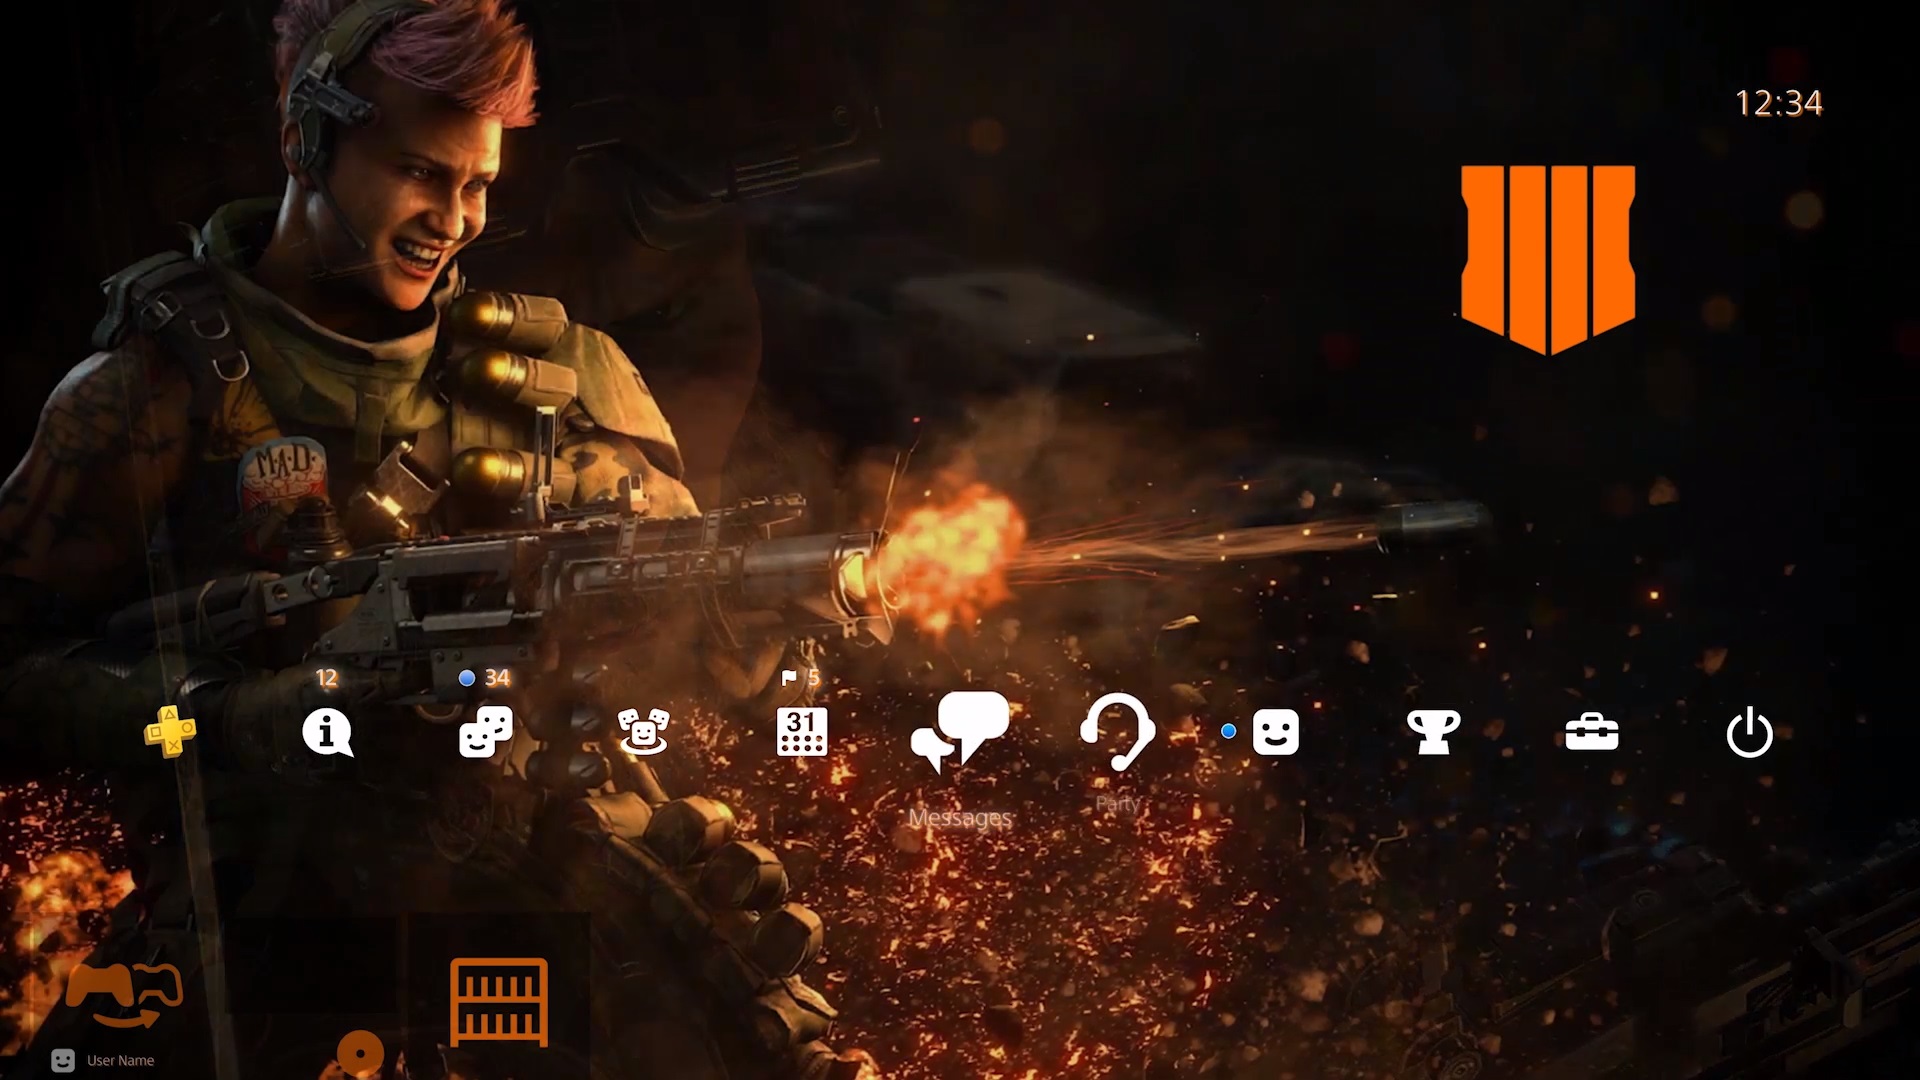 Call Of Duty Black Ops 4 Free Exclusive Ps4 Dynamic Theme And Avatars For A Limited Time Gamepretty